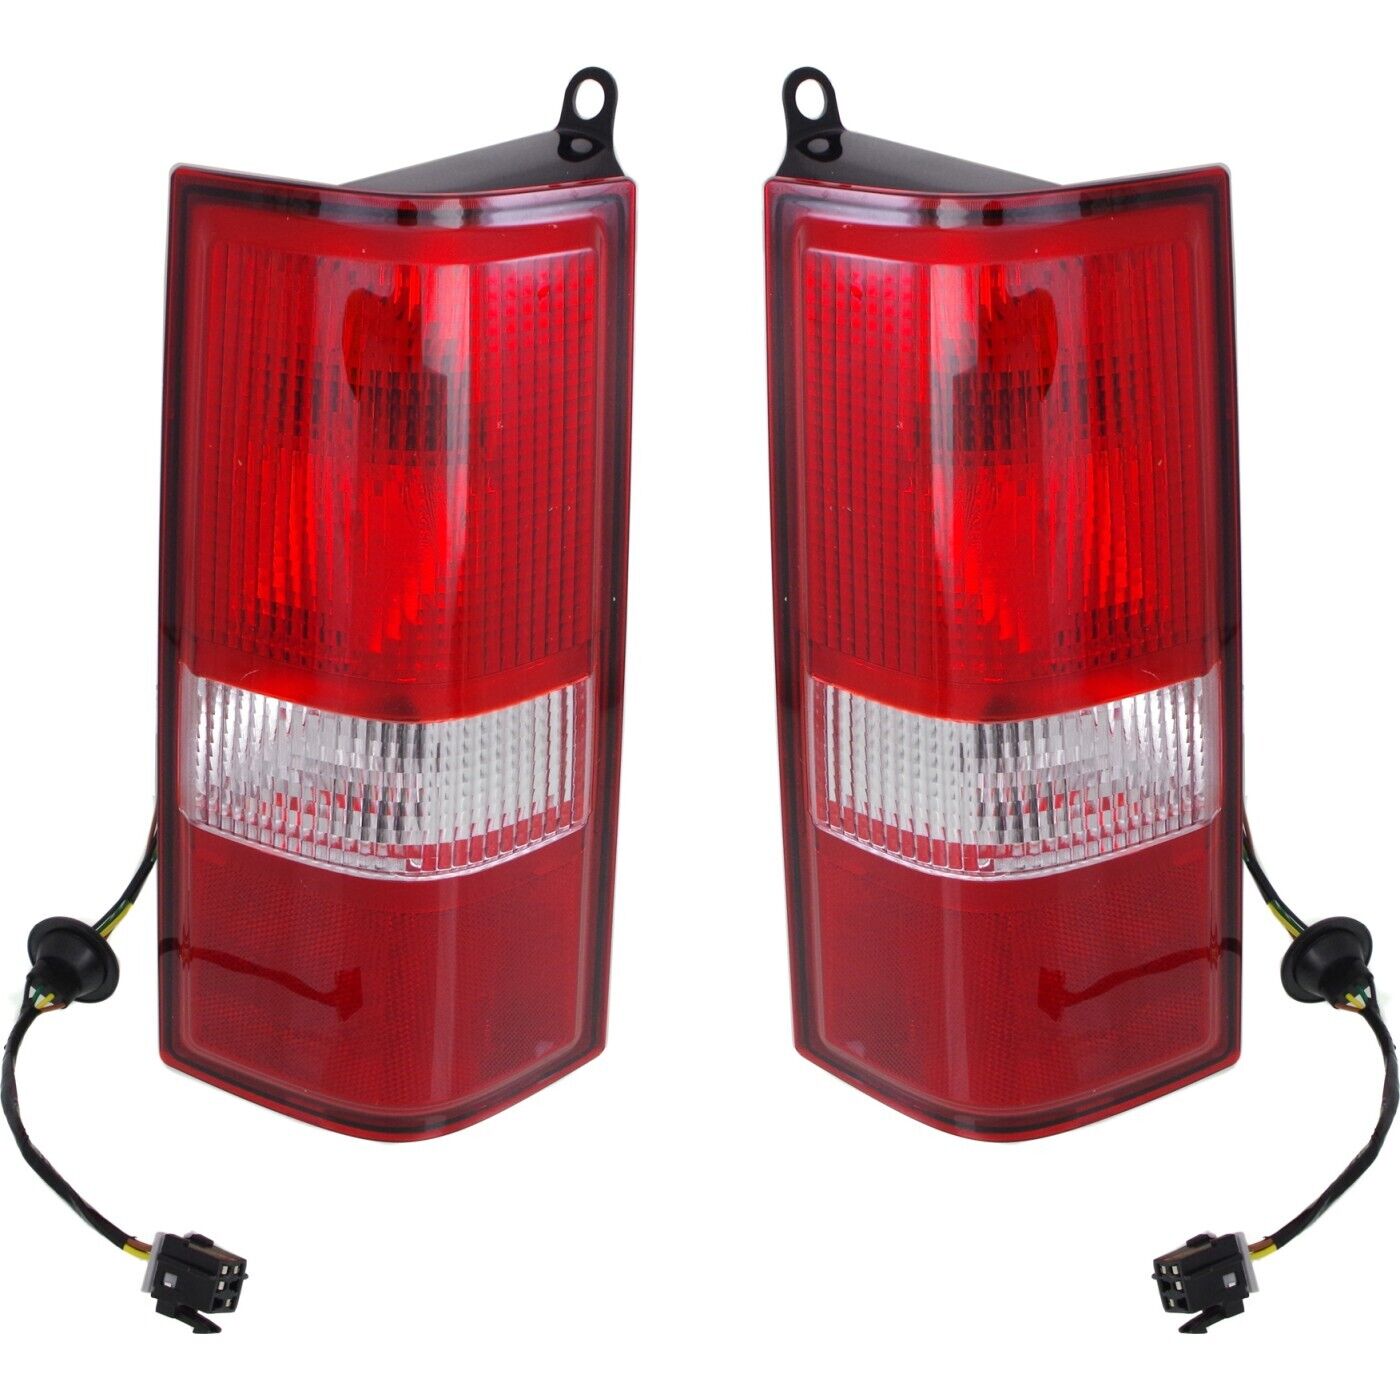 Tail Light Set For 2003-2021 Express 2500 Savana 2500 With Bulb Left and Right